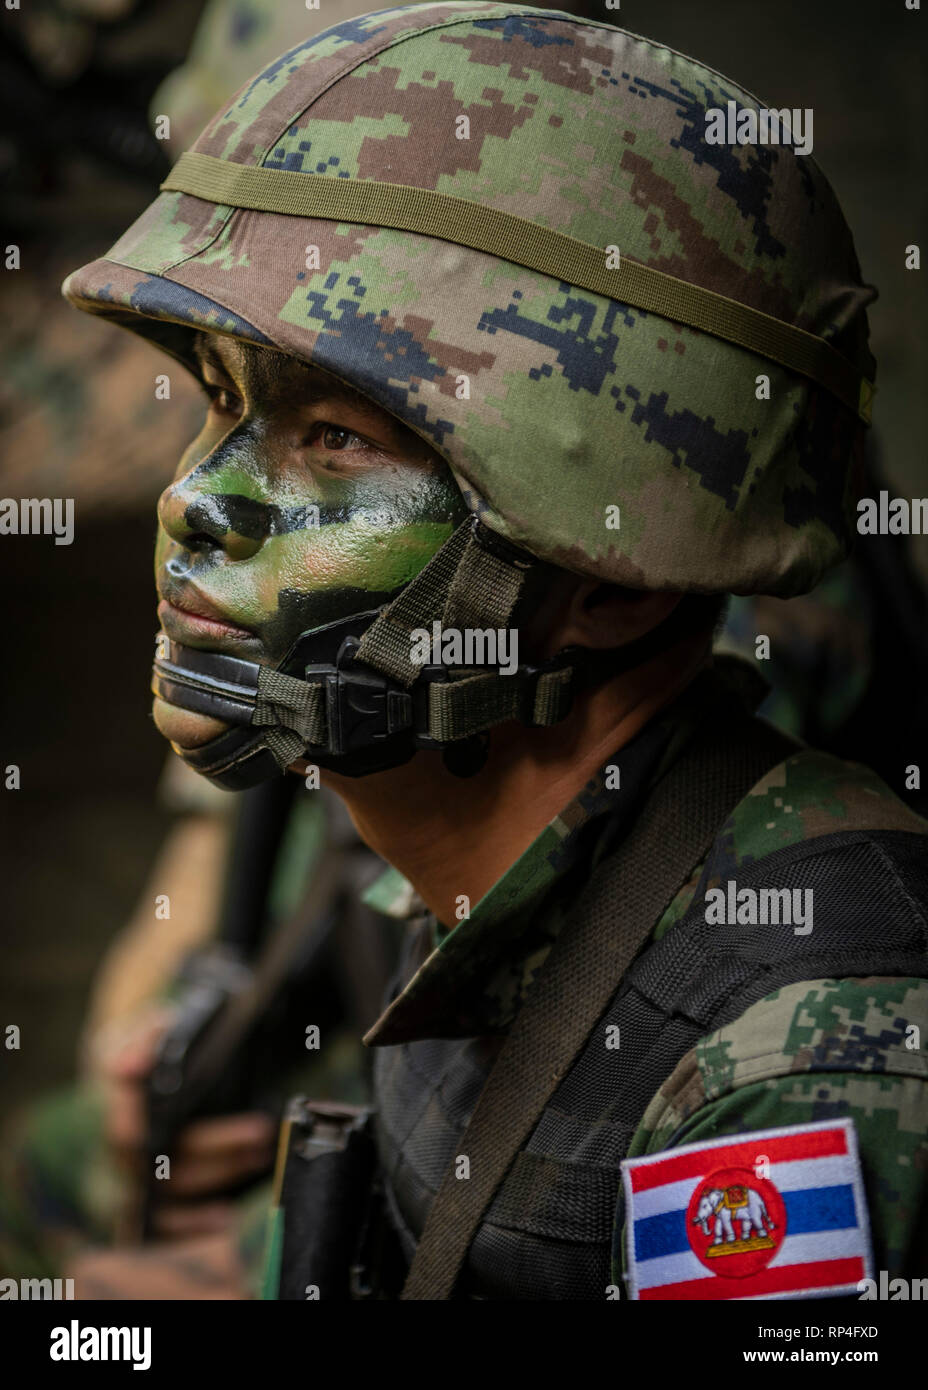 Royal Thai Marines wearing camouflage face paint at a live-fire exercise during Cobra Gold 19 at the Ban Chan Krem training area February 20, 2019 in Chantaklem, Thailand. Cobra Gold is the largest annual joint military cooperation exercise in the Indo-Pacific region. Stock Photo